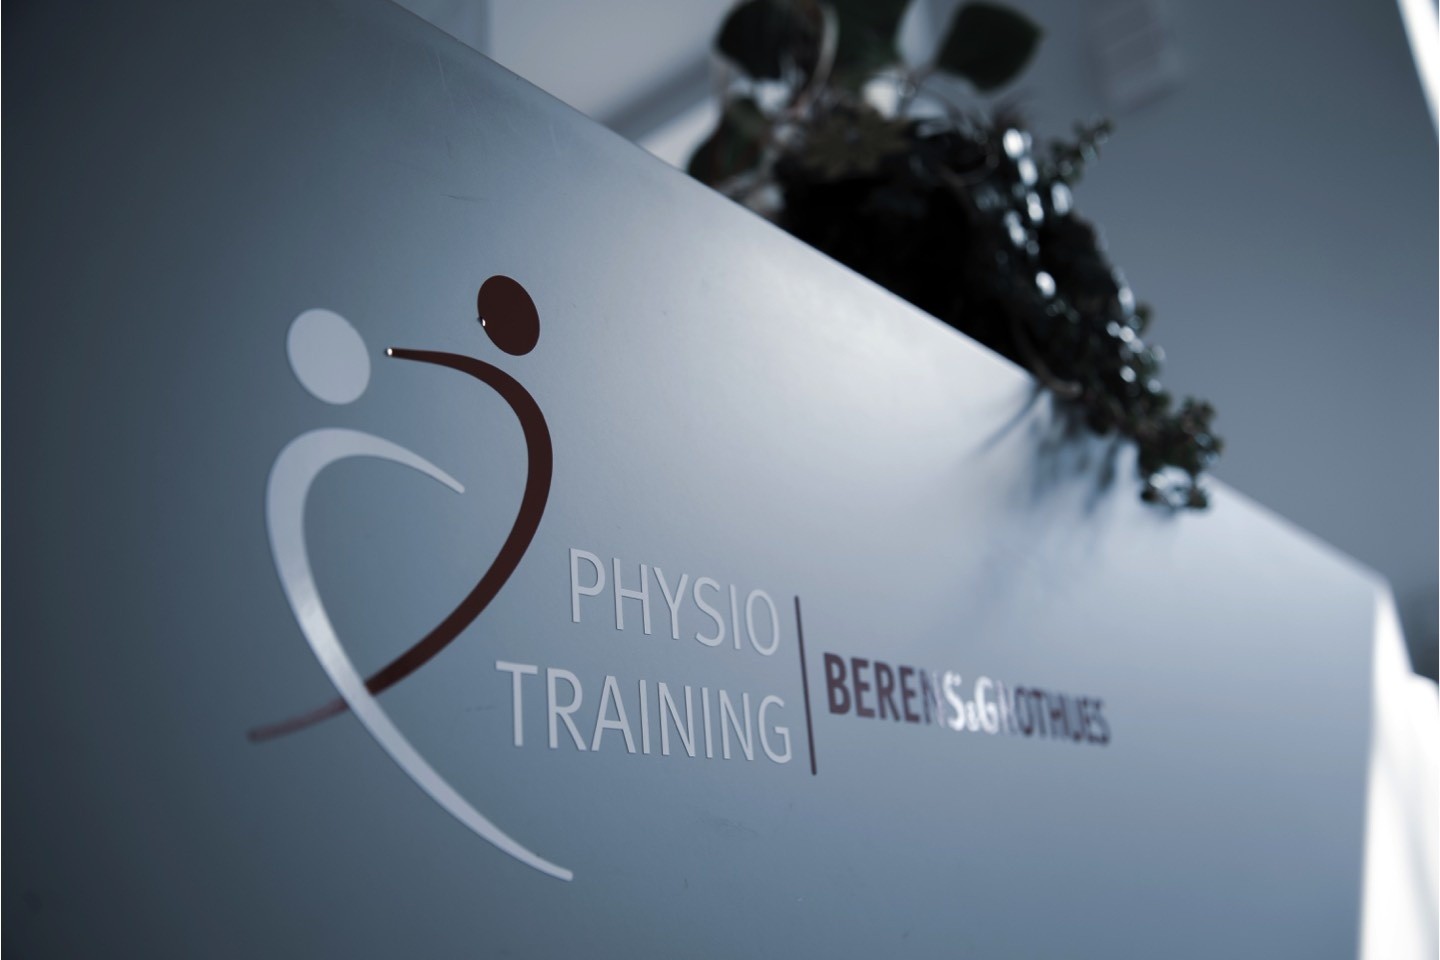 Physio,Berens,Grothues,Berens und Grothues,Warendorf,Physiotherapie,Physio,Training,